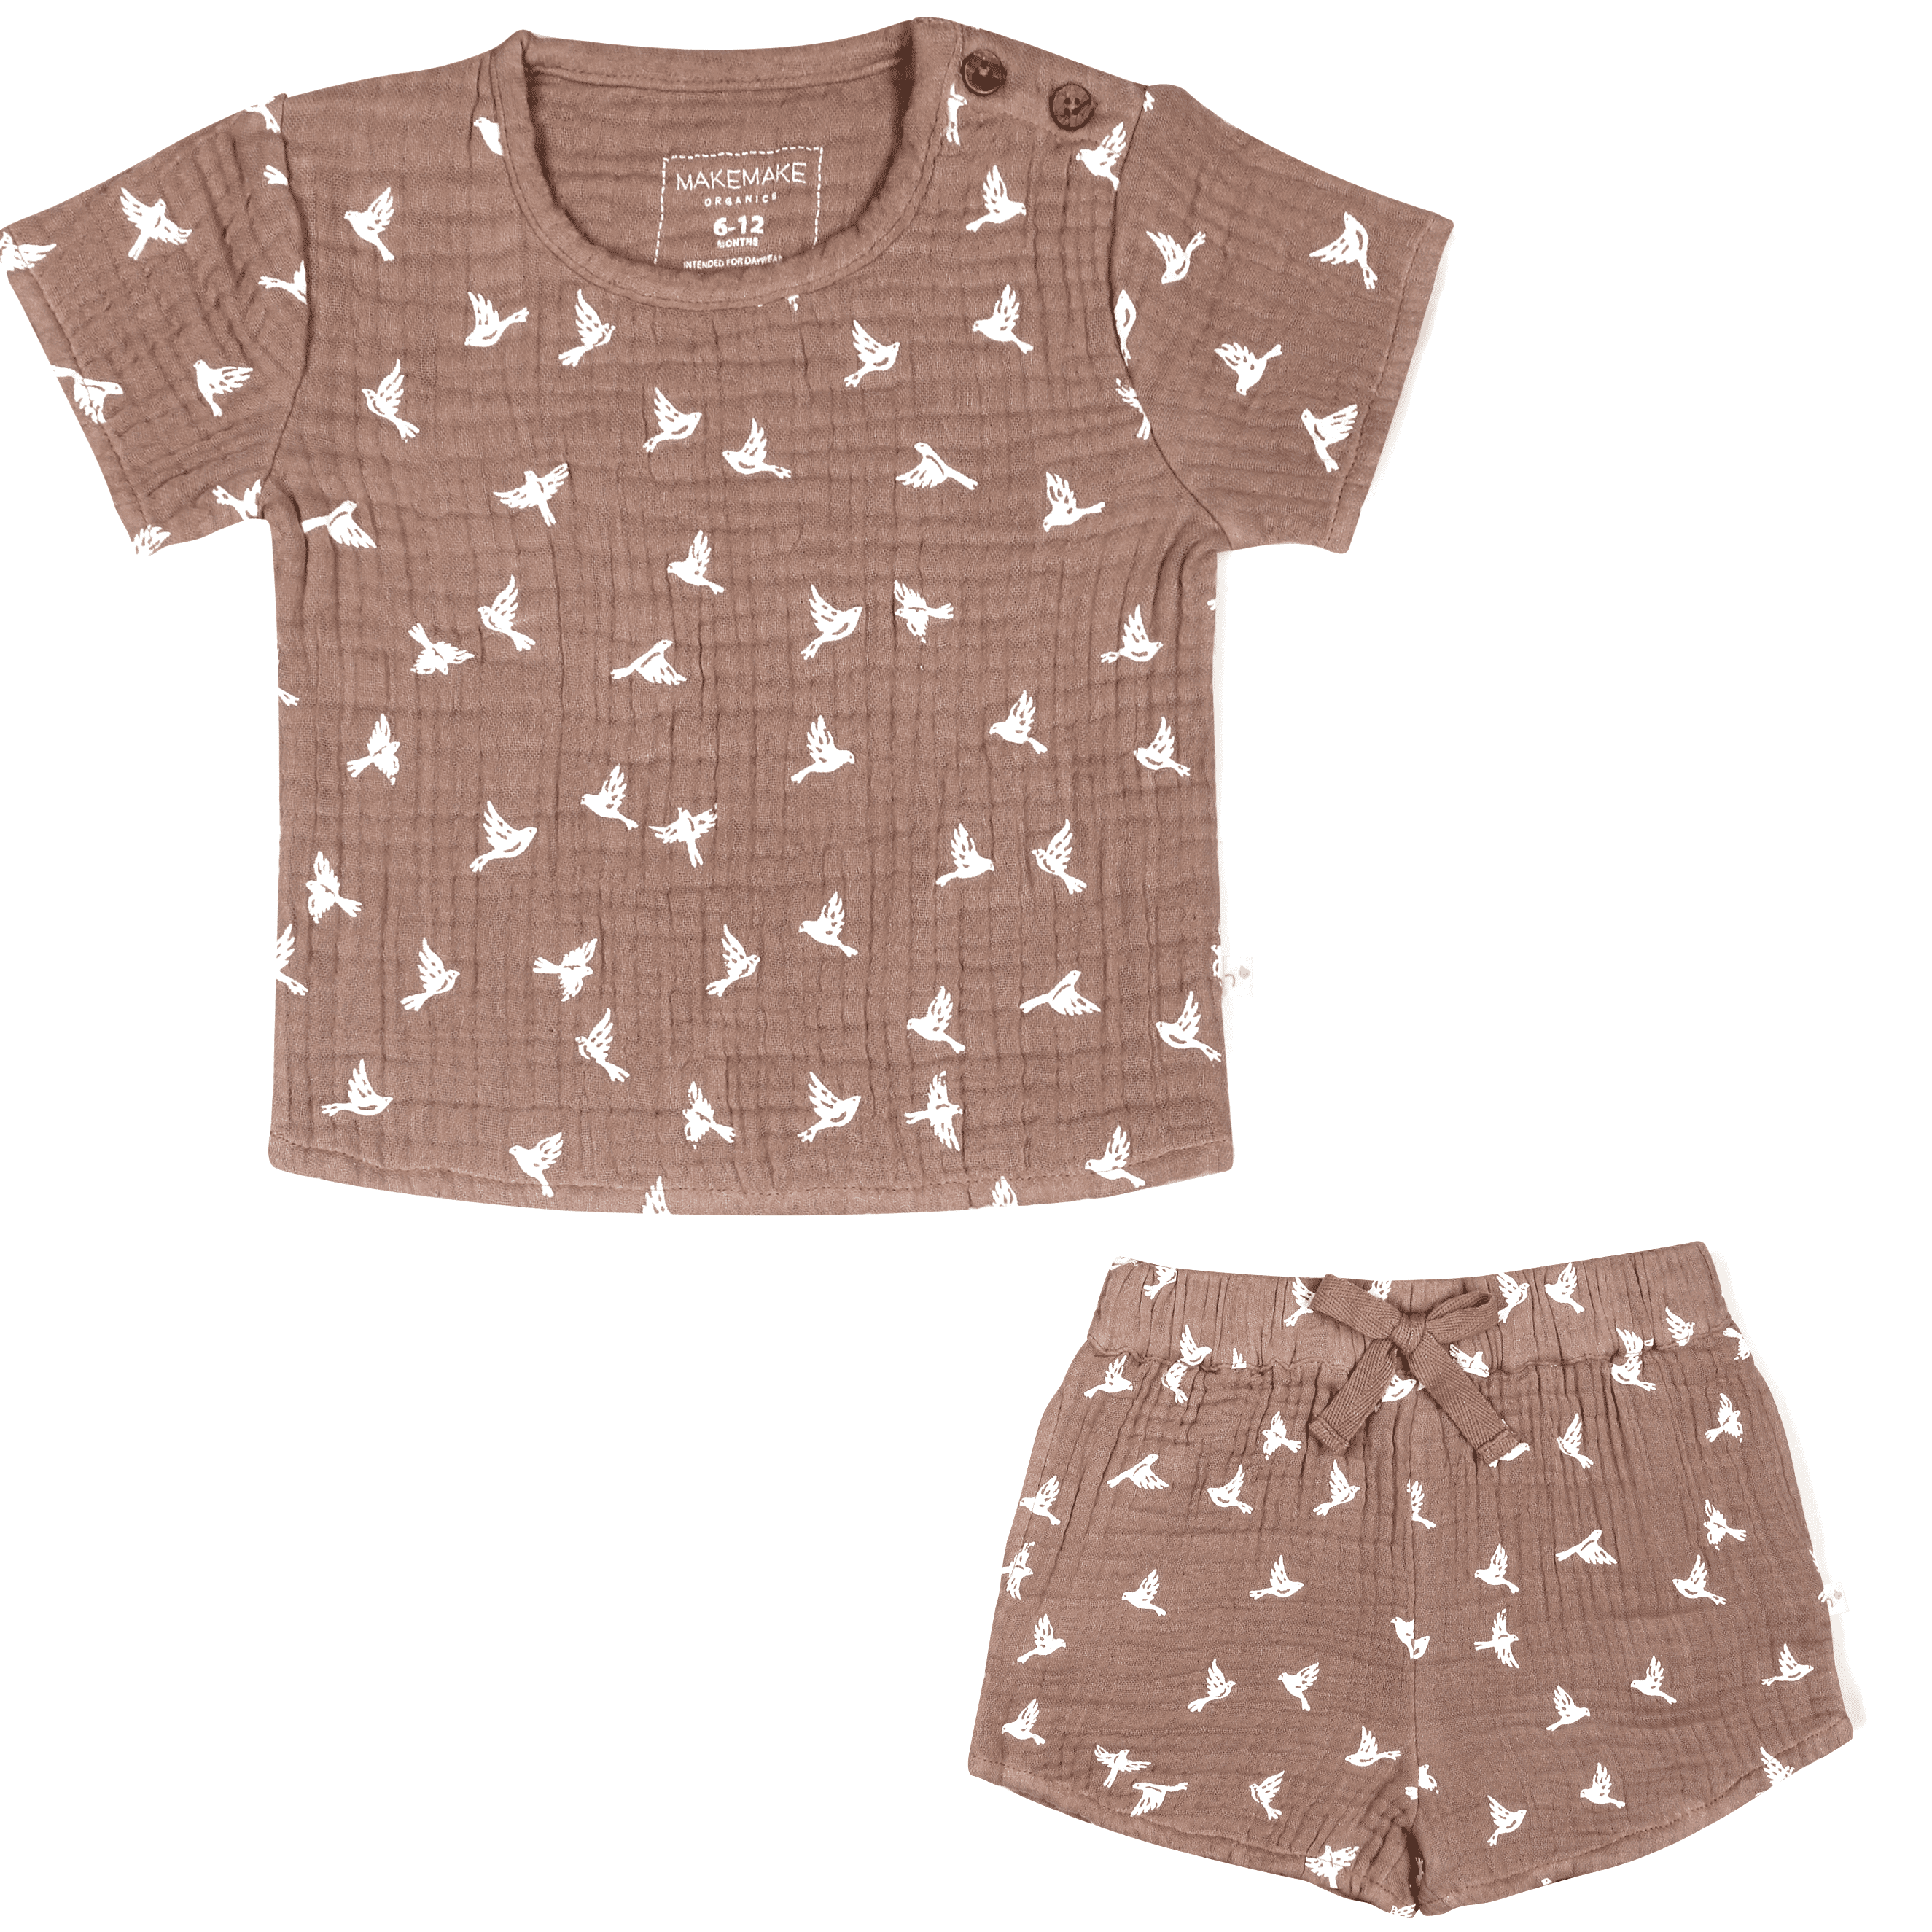 A brown children's outfit featuring Makemake Organics' Organic Muslin Top and Shorts 2 Piece Set - Flock, with a short-sleeved shirt and matching shorts, both with a white bird print design. The shirt has a button at the shoulder, and the shorts have a bow at.